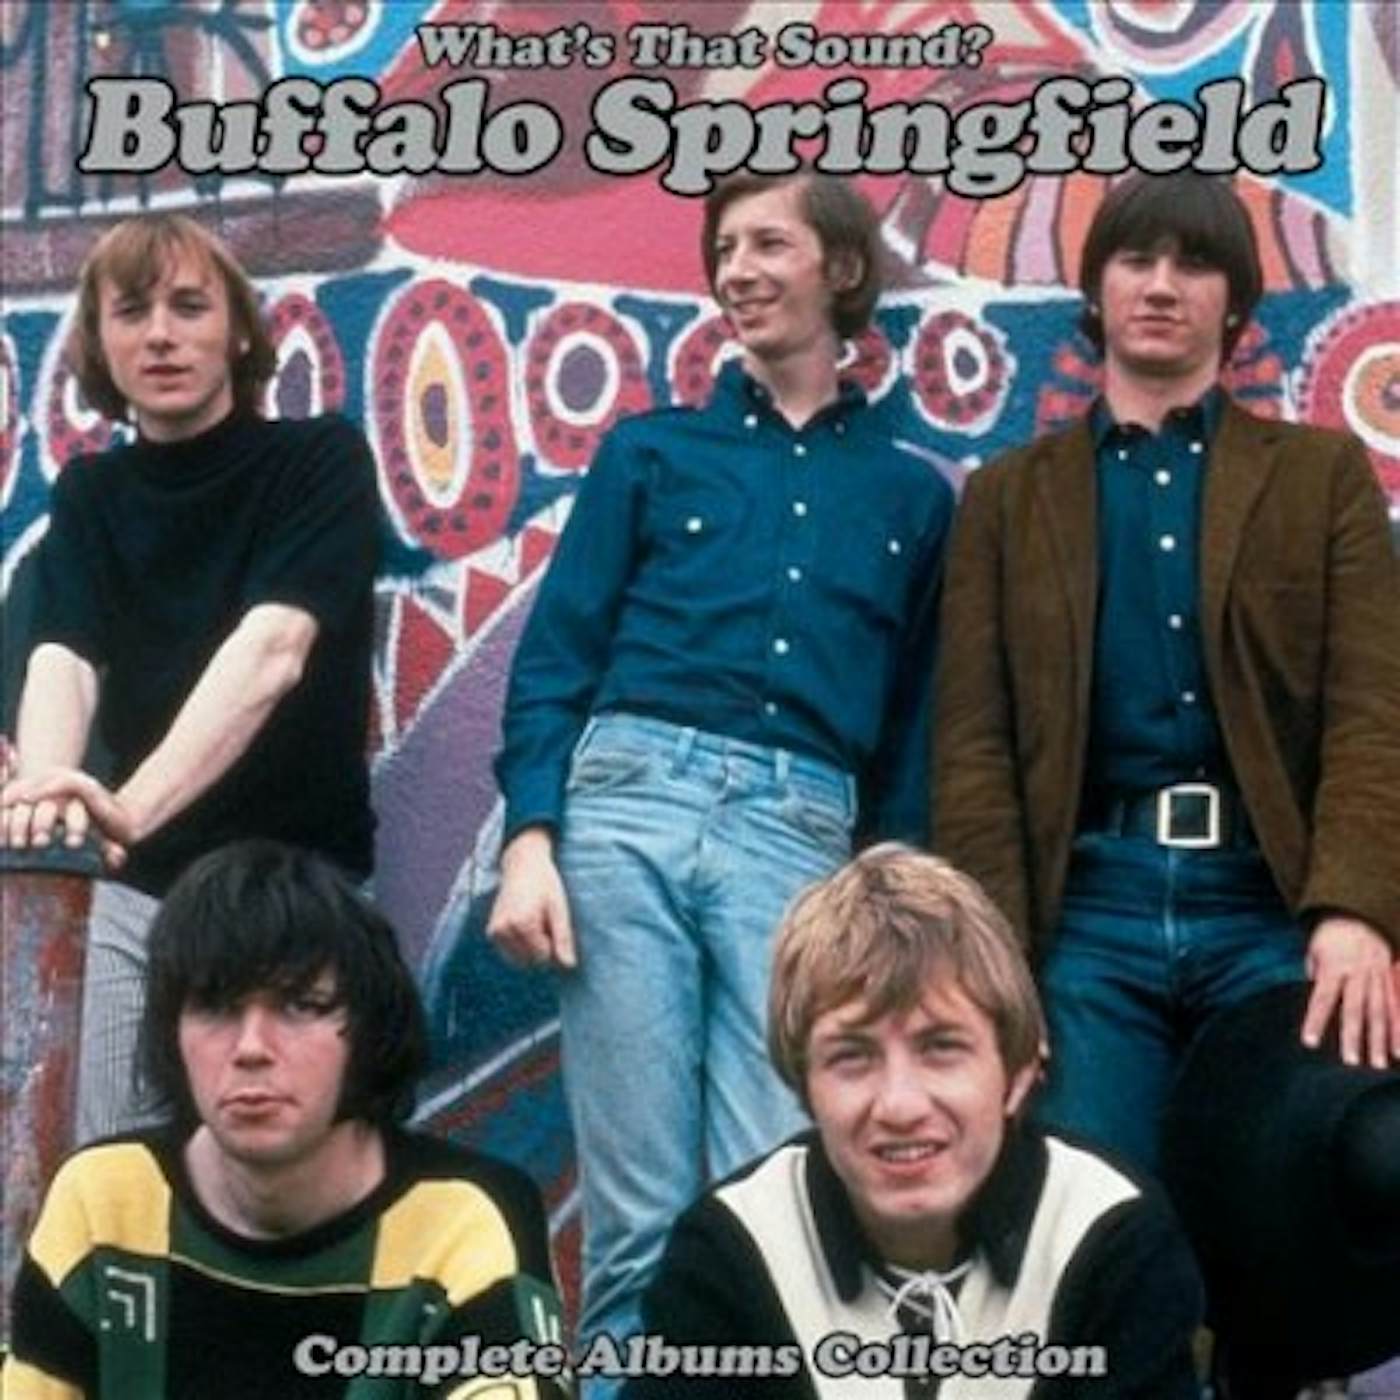 Buffalo Springfield What's That Sound? Complete Albums Collection Vinyl Record